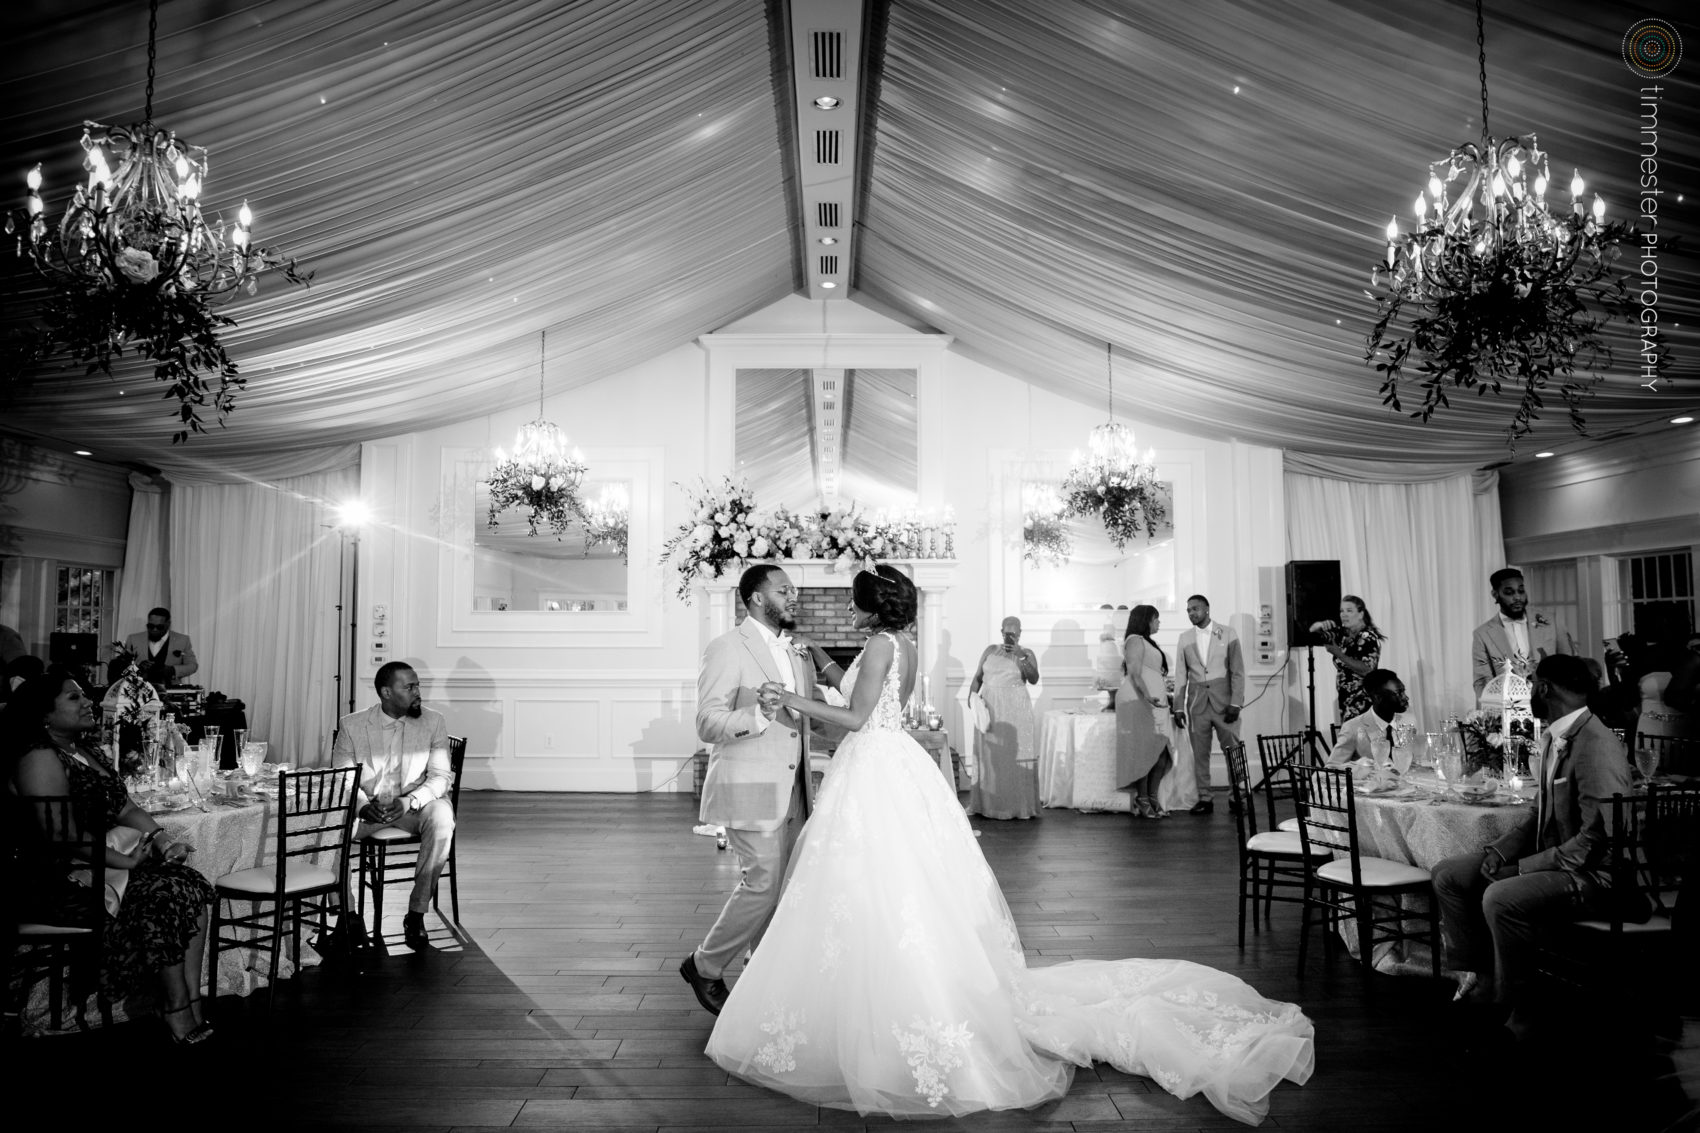 Wedding day first dance between the bride and groom at Highgrove Estate.